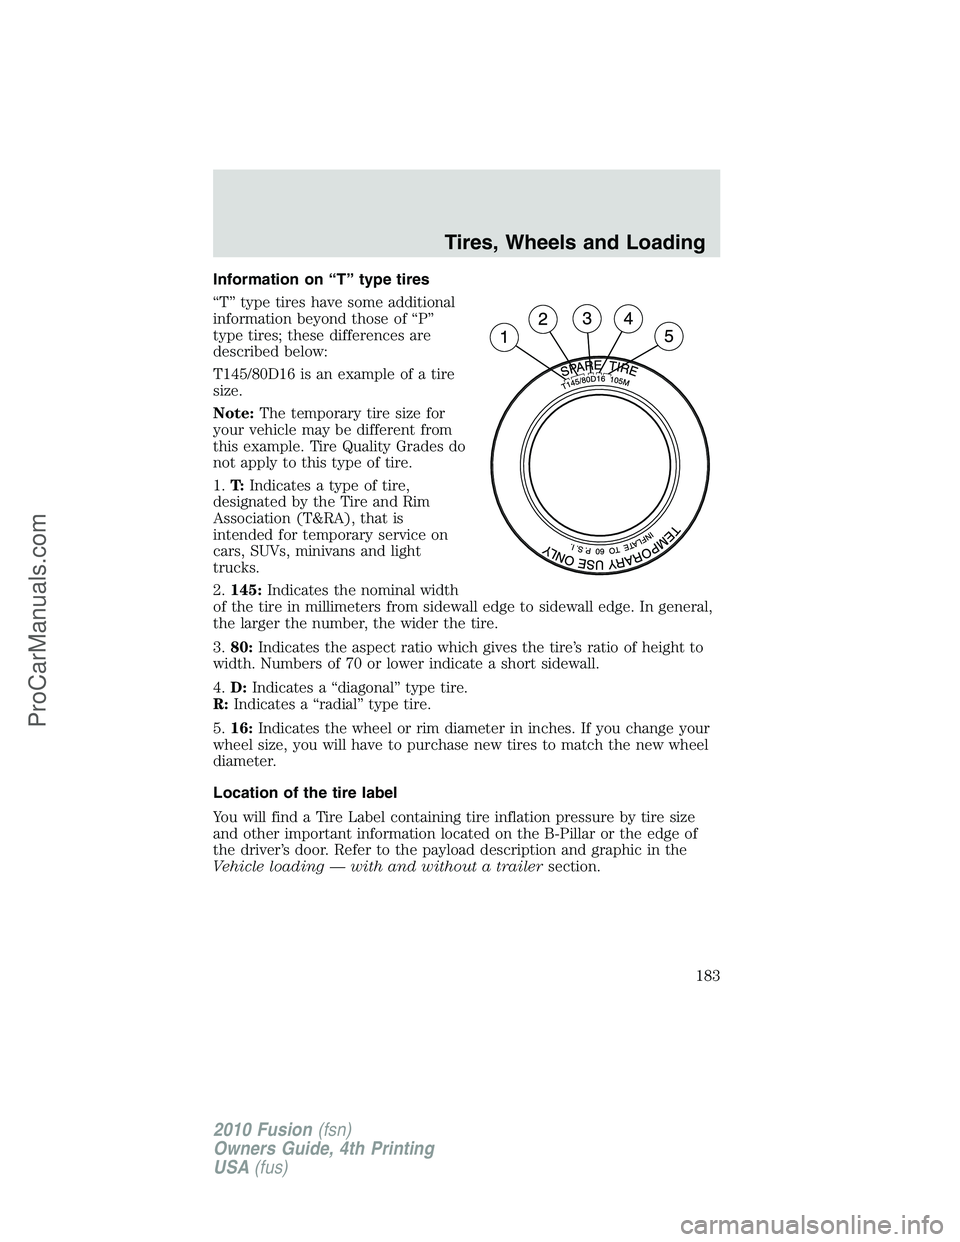 FORD FUSION 2010  Owners Manual Information on “T” type tires
“T” type tires have some additional
information beyond those of “P”
type tires; these differences are
described below:
T145/80D16 is an example of a tire
size